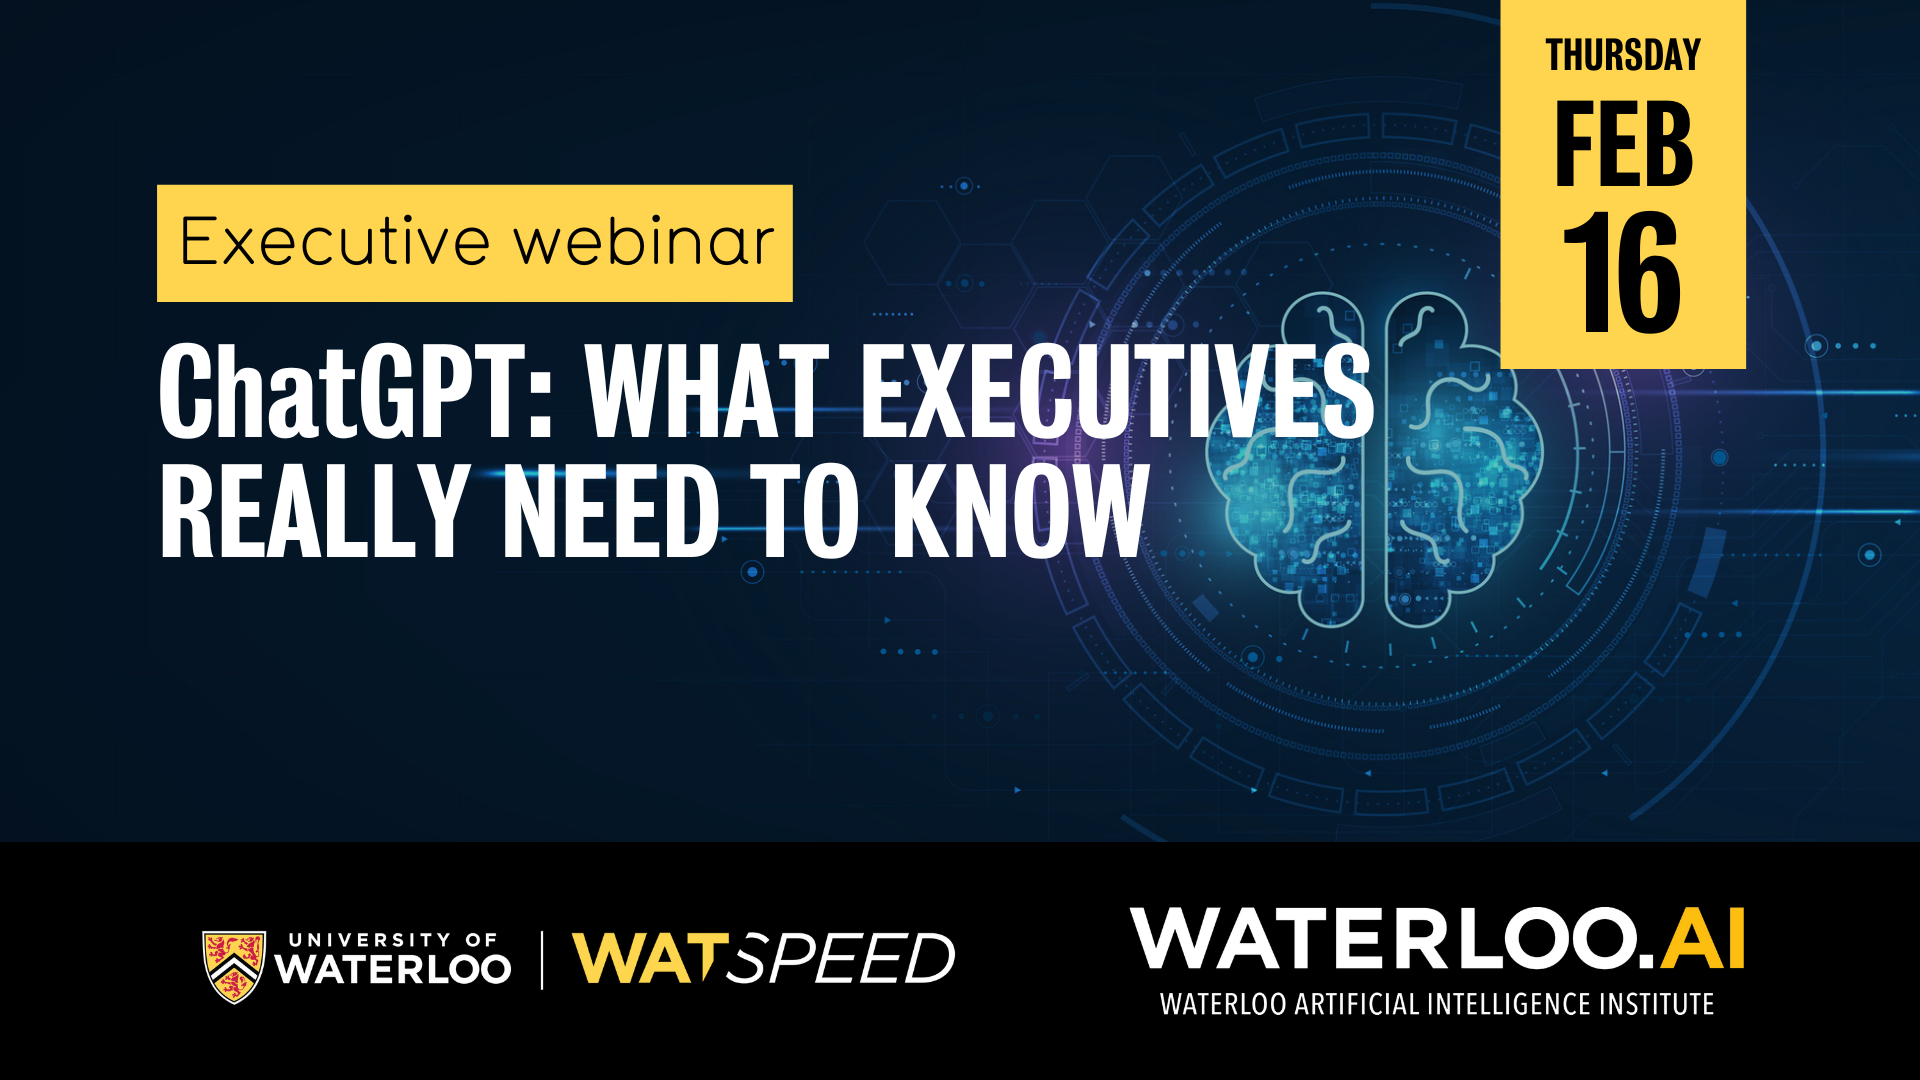 ChatGPT: What executives really need to know | Executive webinar